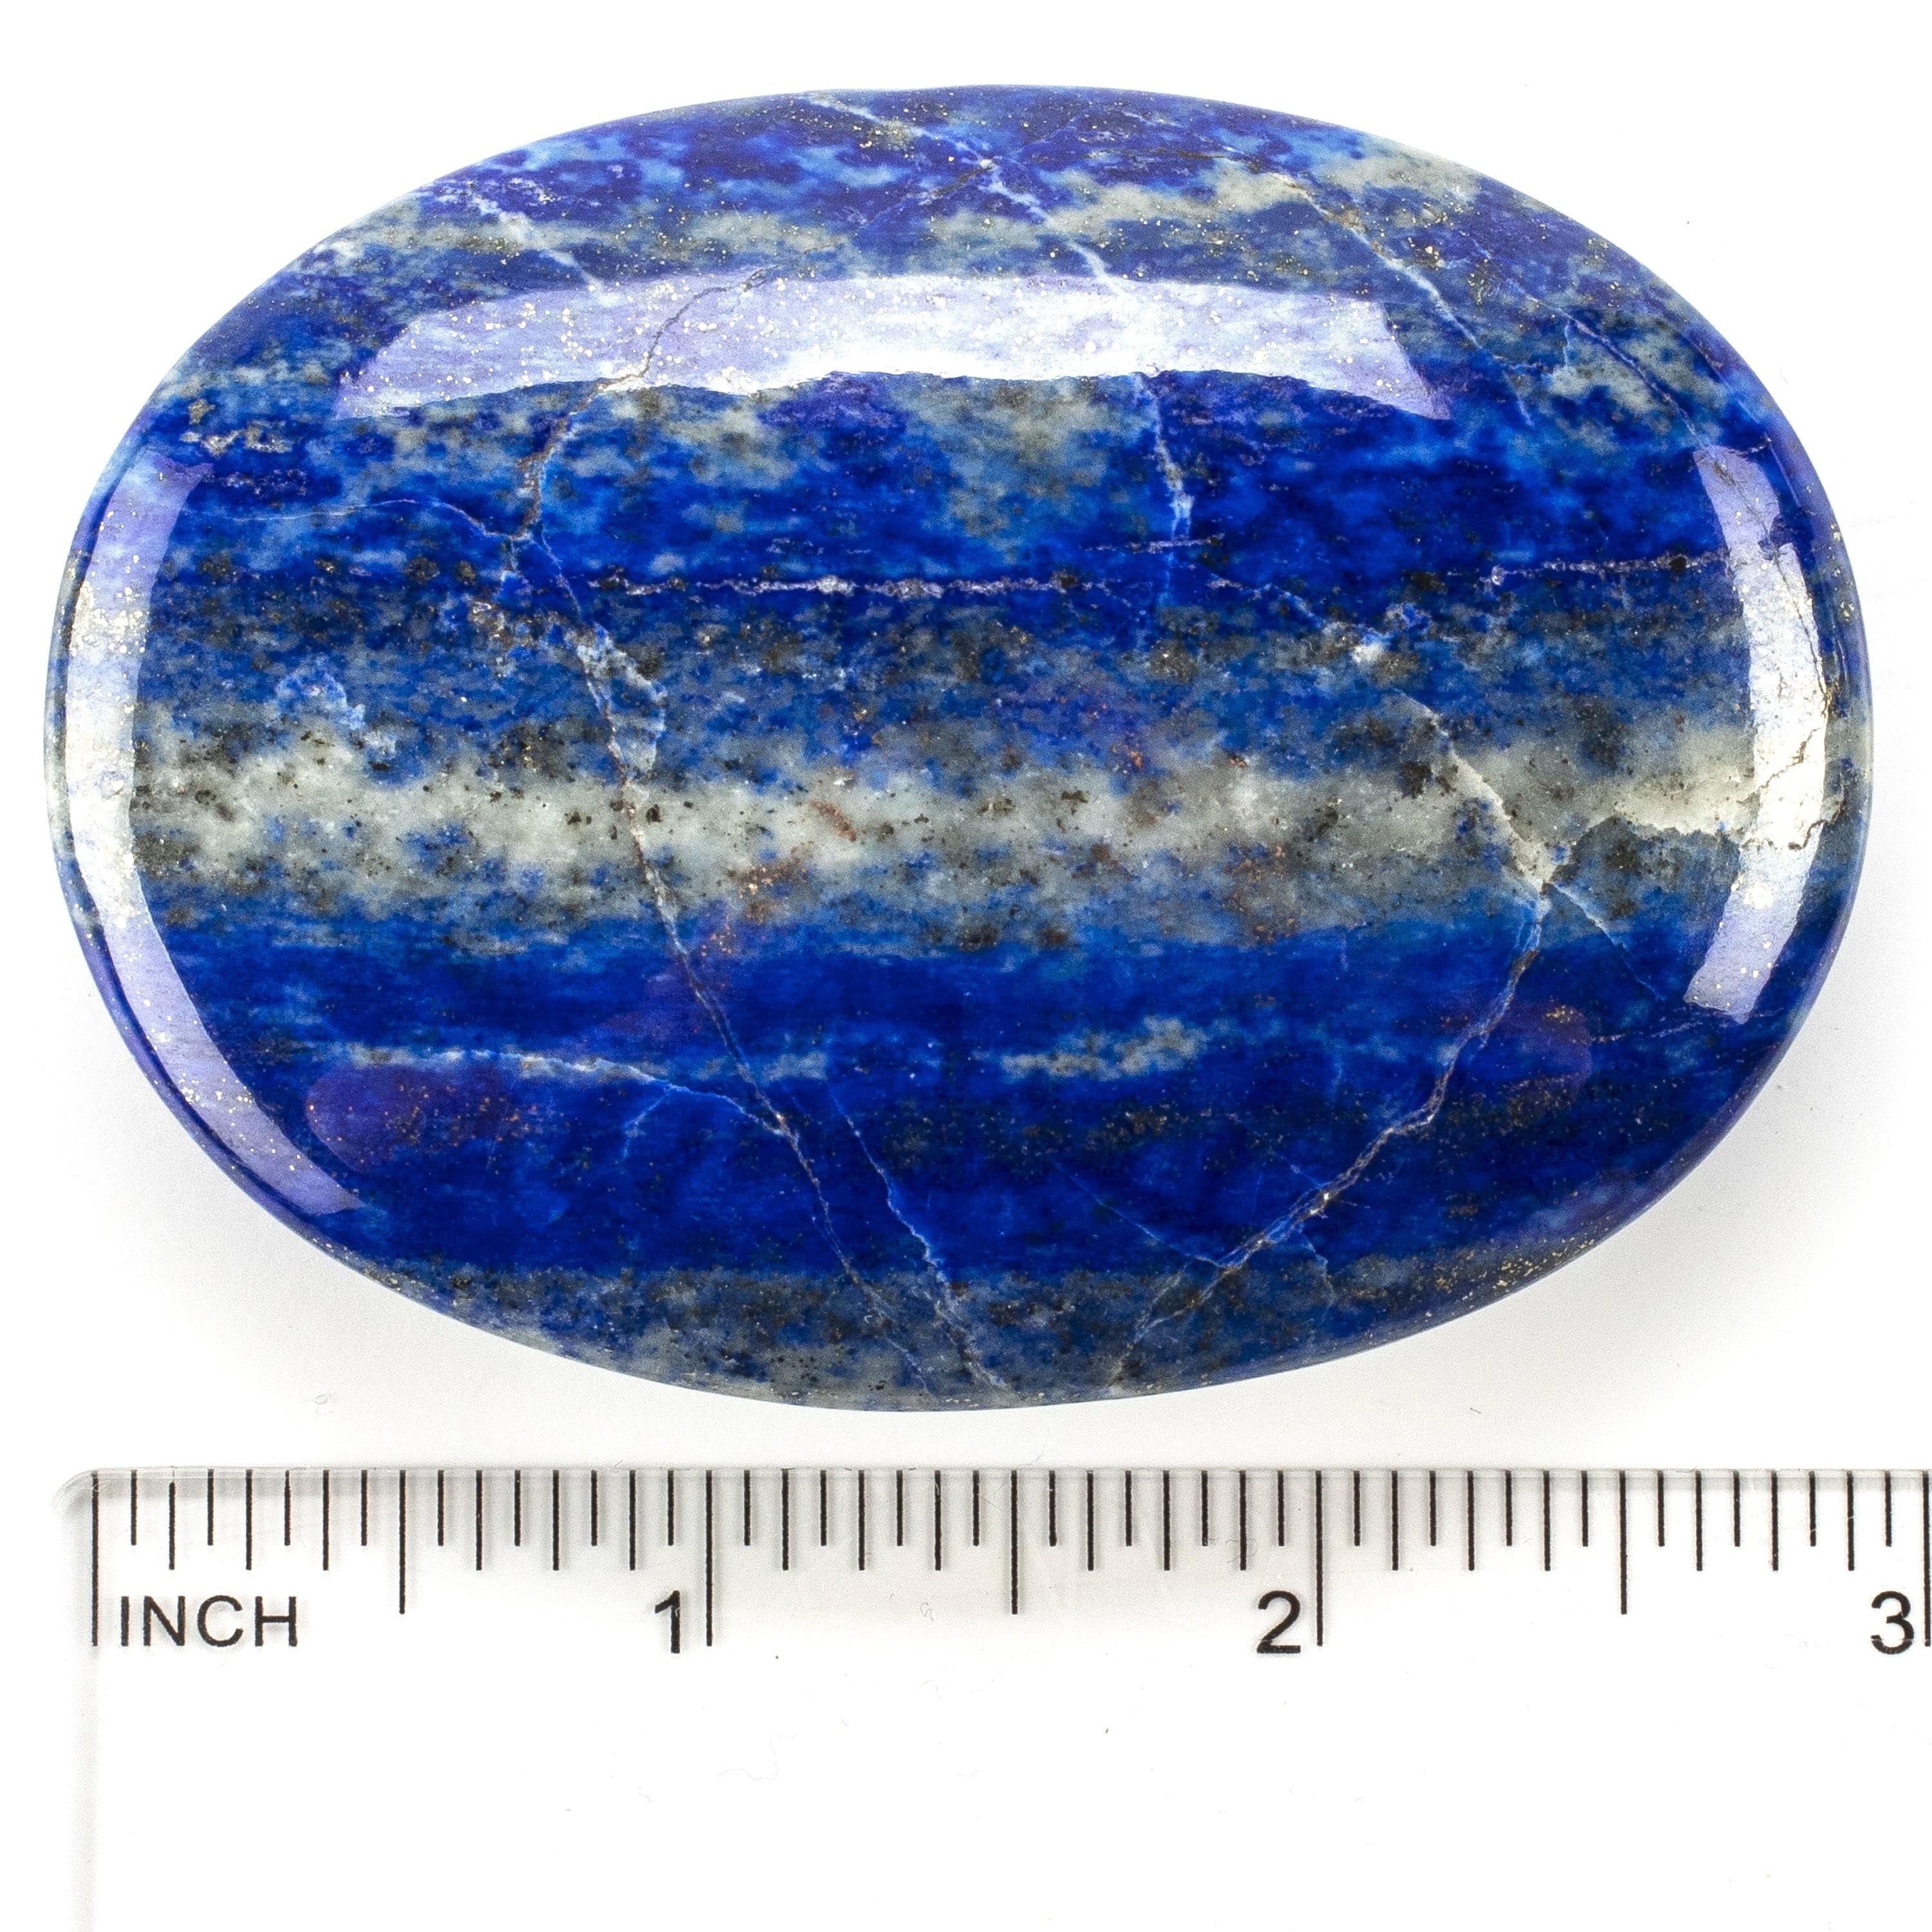 Kalifano Lapis Rare Natural Blue Lapis Lazuli Polished Palm Stone Carving from Afghanistan - 120 g LPS400.010